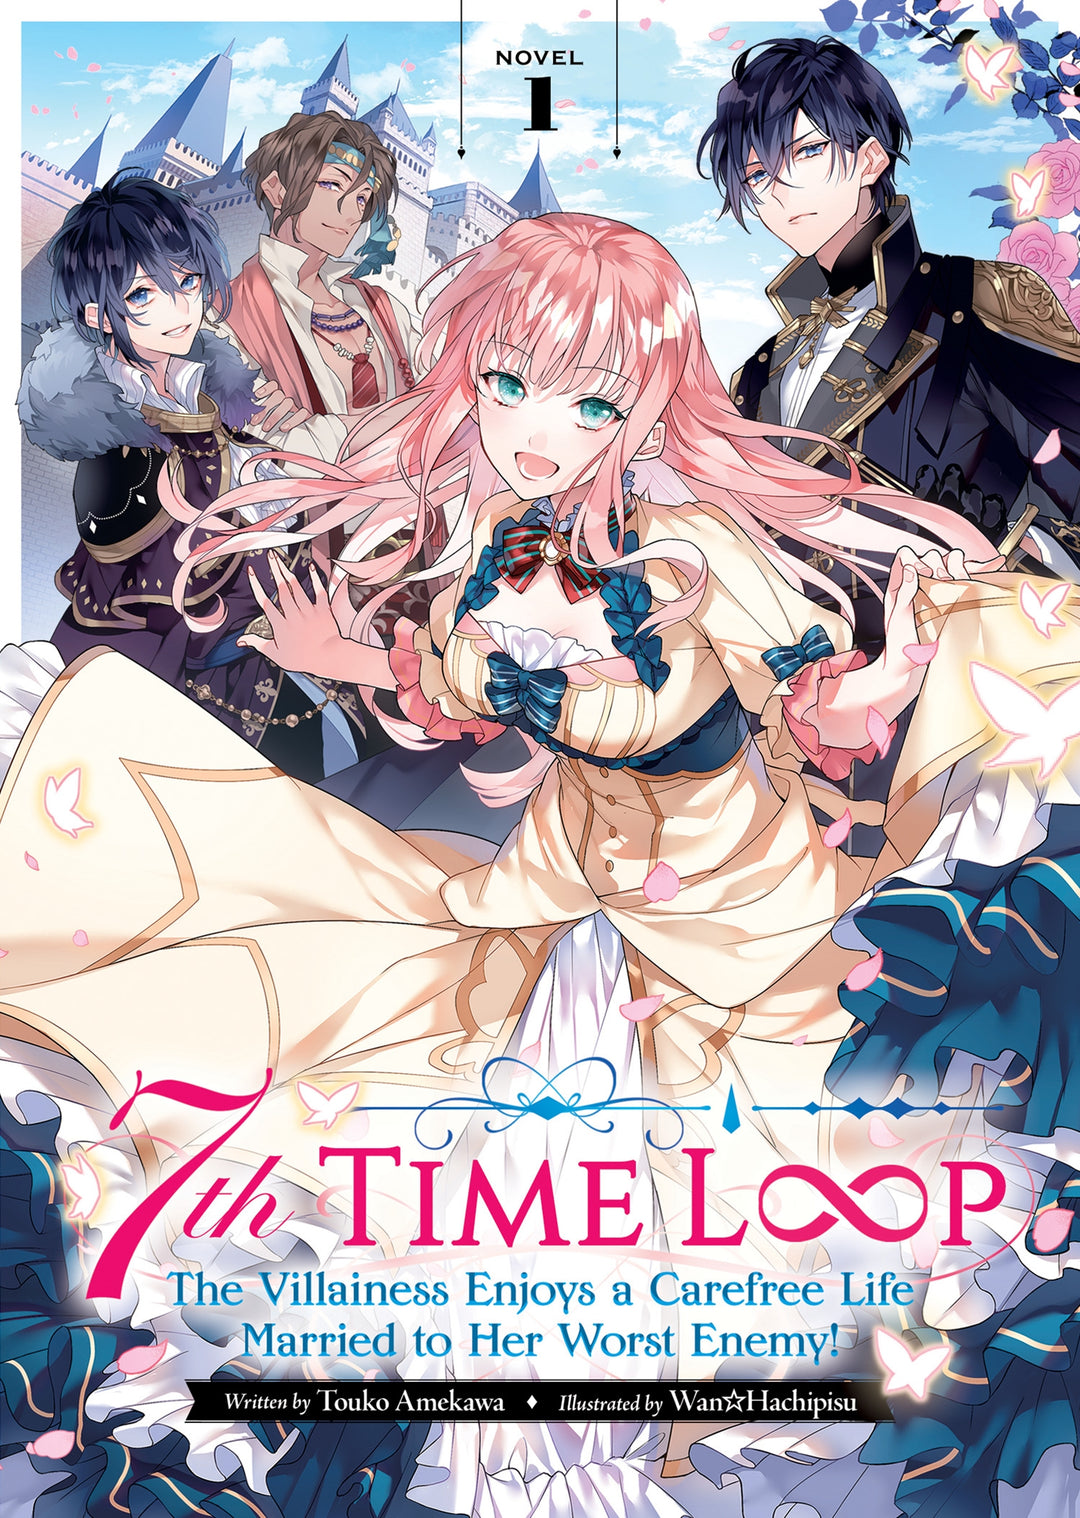 7th Time Loop The Villainess Enjoys a Carefree Life Married to Her Worst Enemy! (Light Novel), Vol. 01